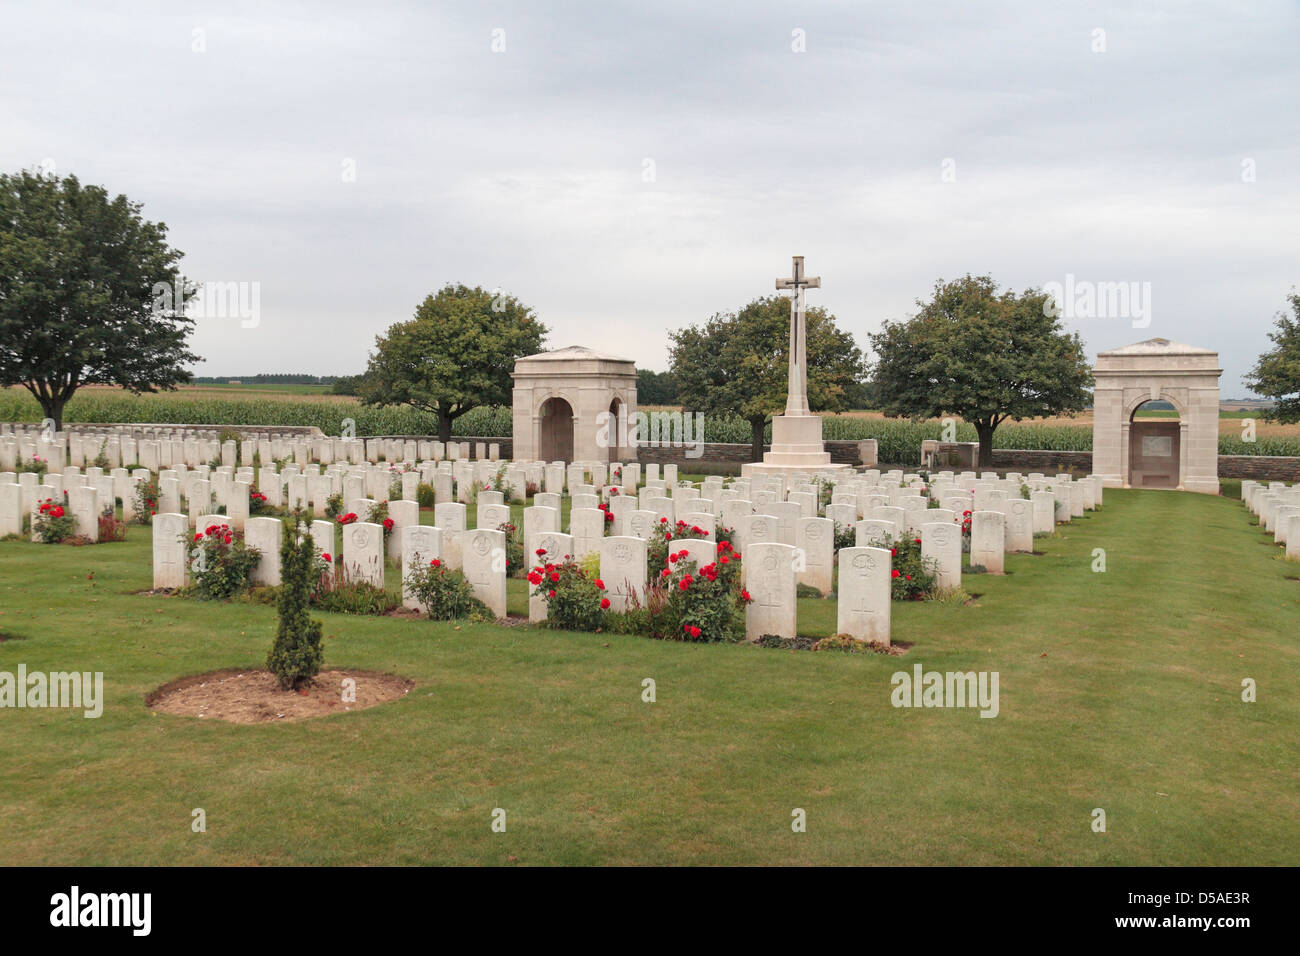 General view of graves and the Cross of Sacrifice in the CWGC Regina Trench Cemetery, Grandcourt, Somme, Picardy, France. Stock Photo